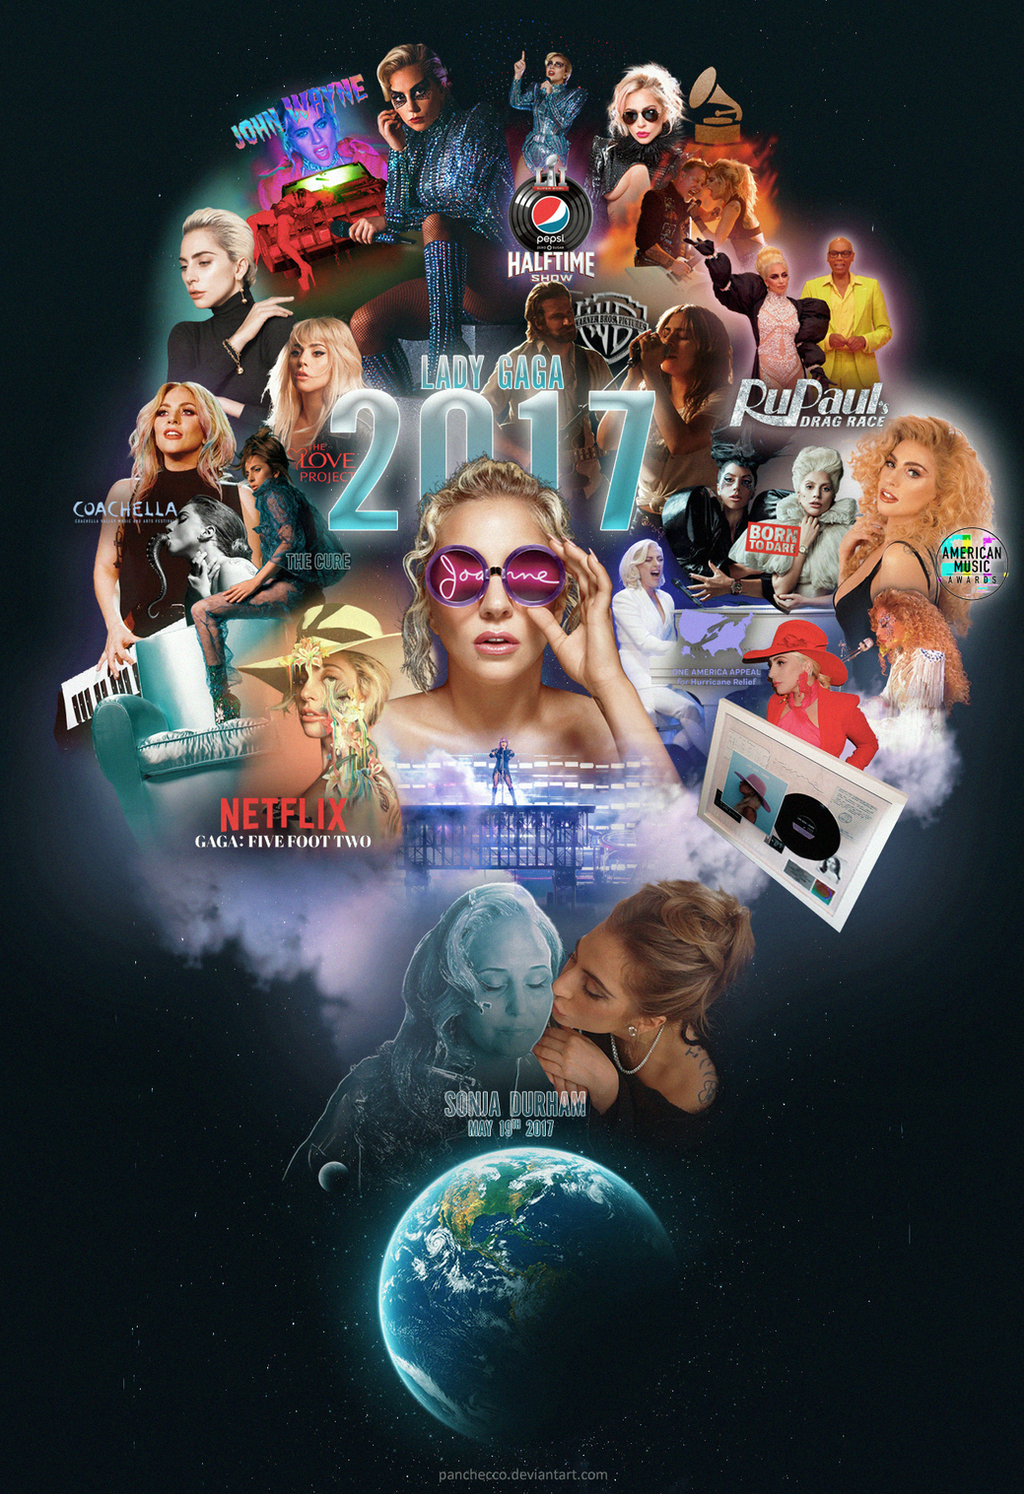 Lady Gaga In 2017 A Tribute To An Amazing And Emotional Year Fan